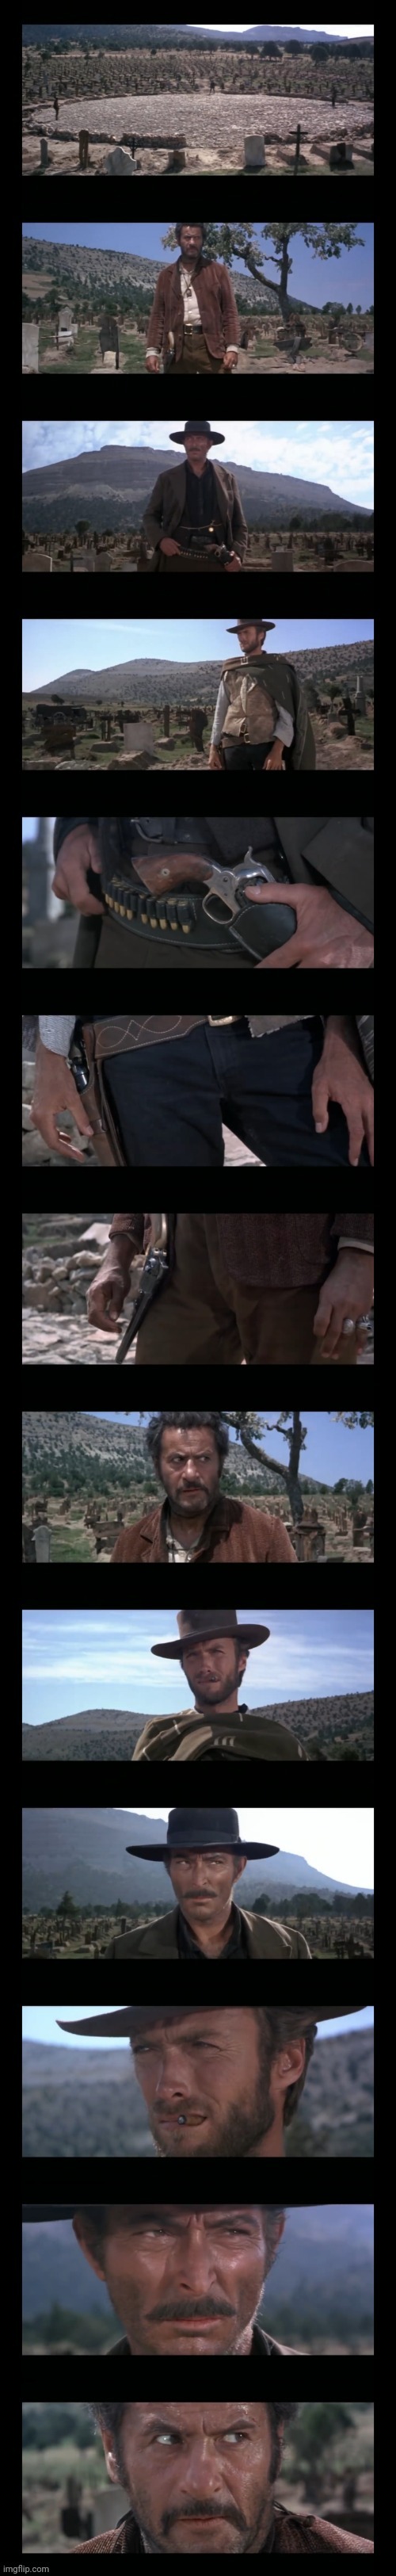 Frame of the Mexican Standoff | image tagged in the good the bad and the ugly,clint eastwood | made w/ Imgflip meme maker